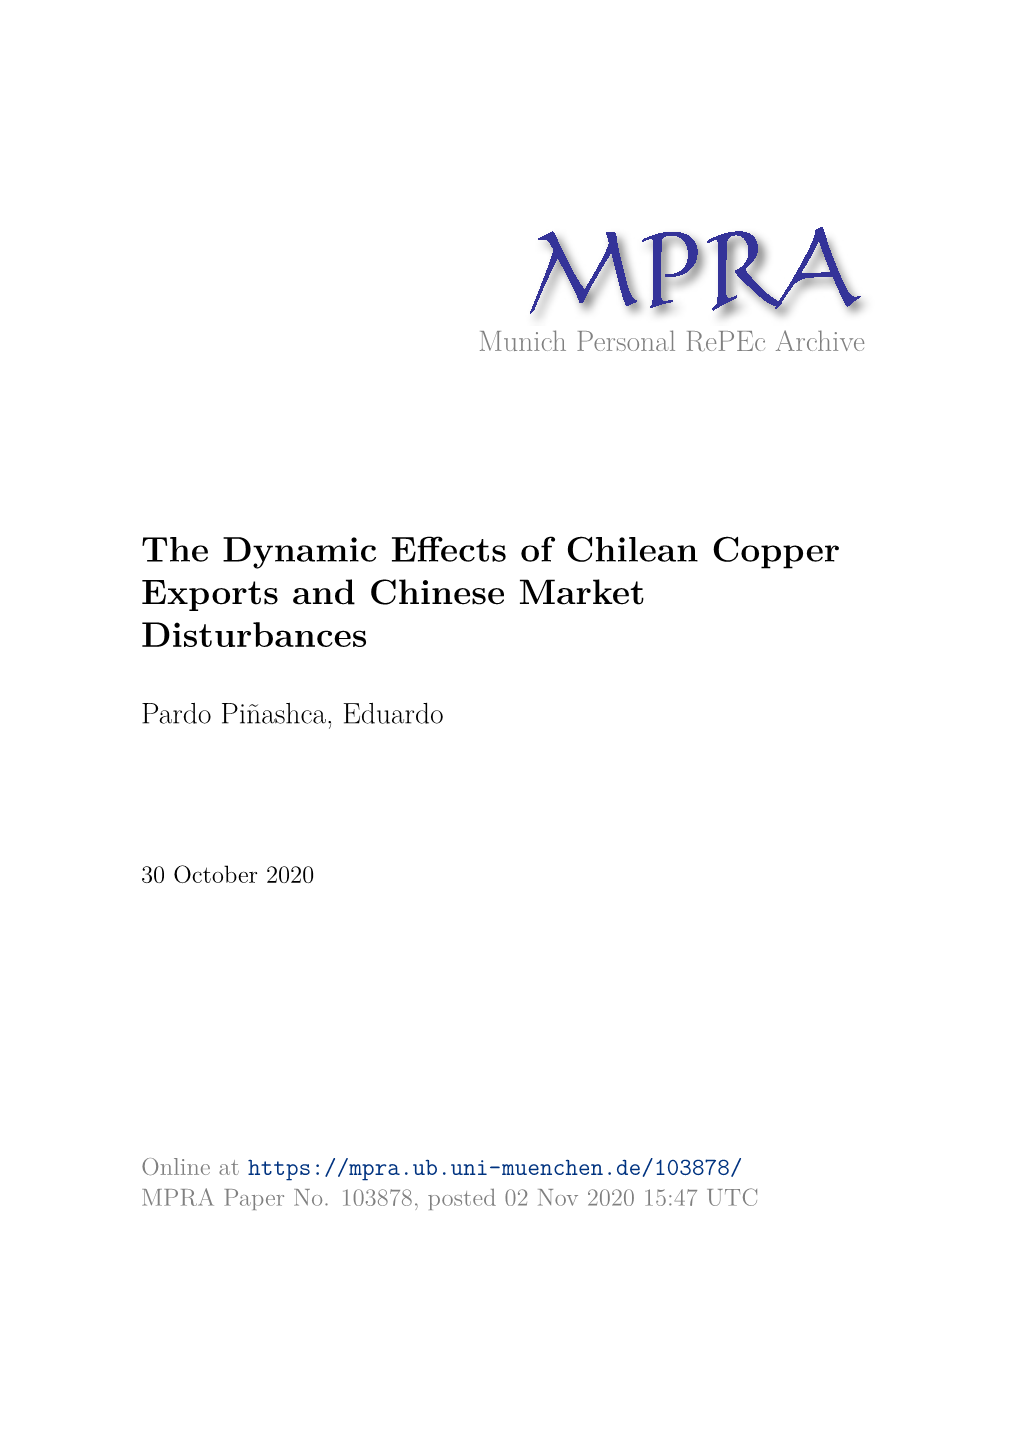 The Dynamic Effects of Chilean Copper Exports and Chinese Market Disturbances